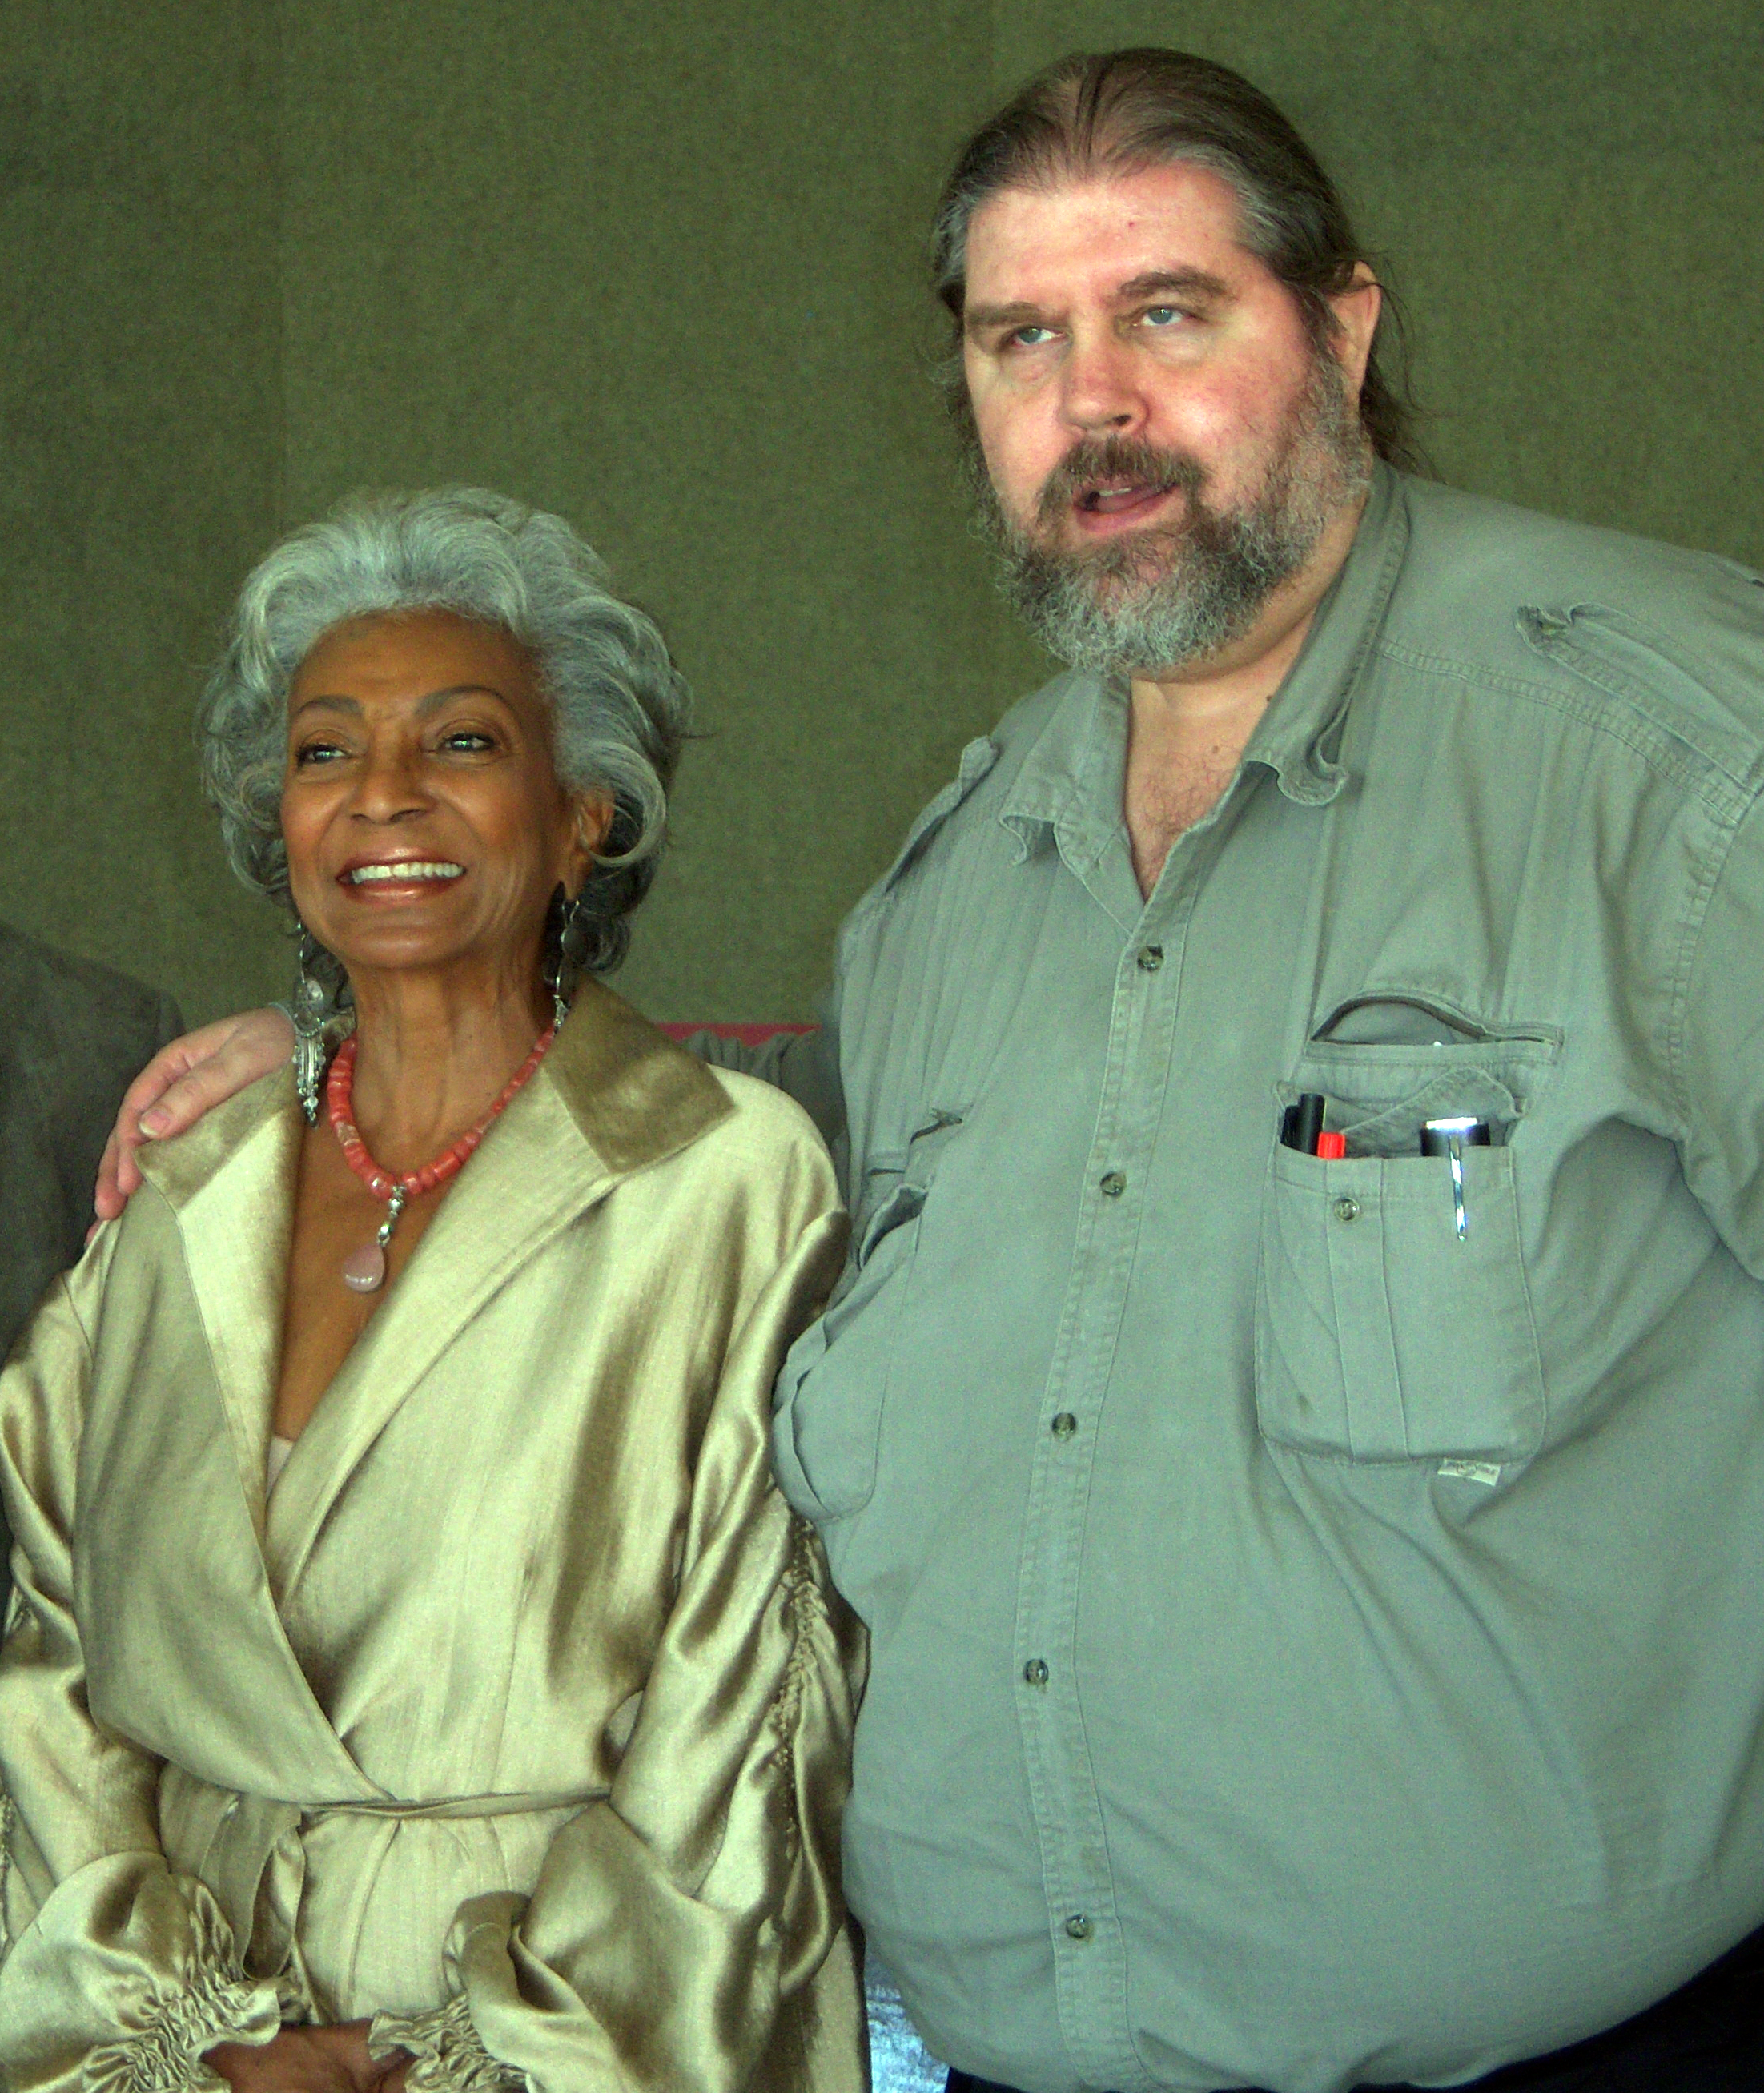 J. Neil Schulman with Nichelle Nichols, promoting Lady Magdalene's for the 2008 Backlot Film Festival.